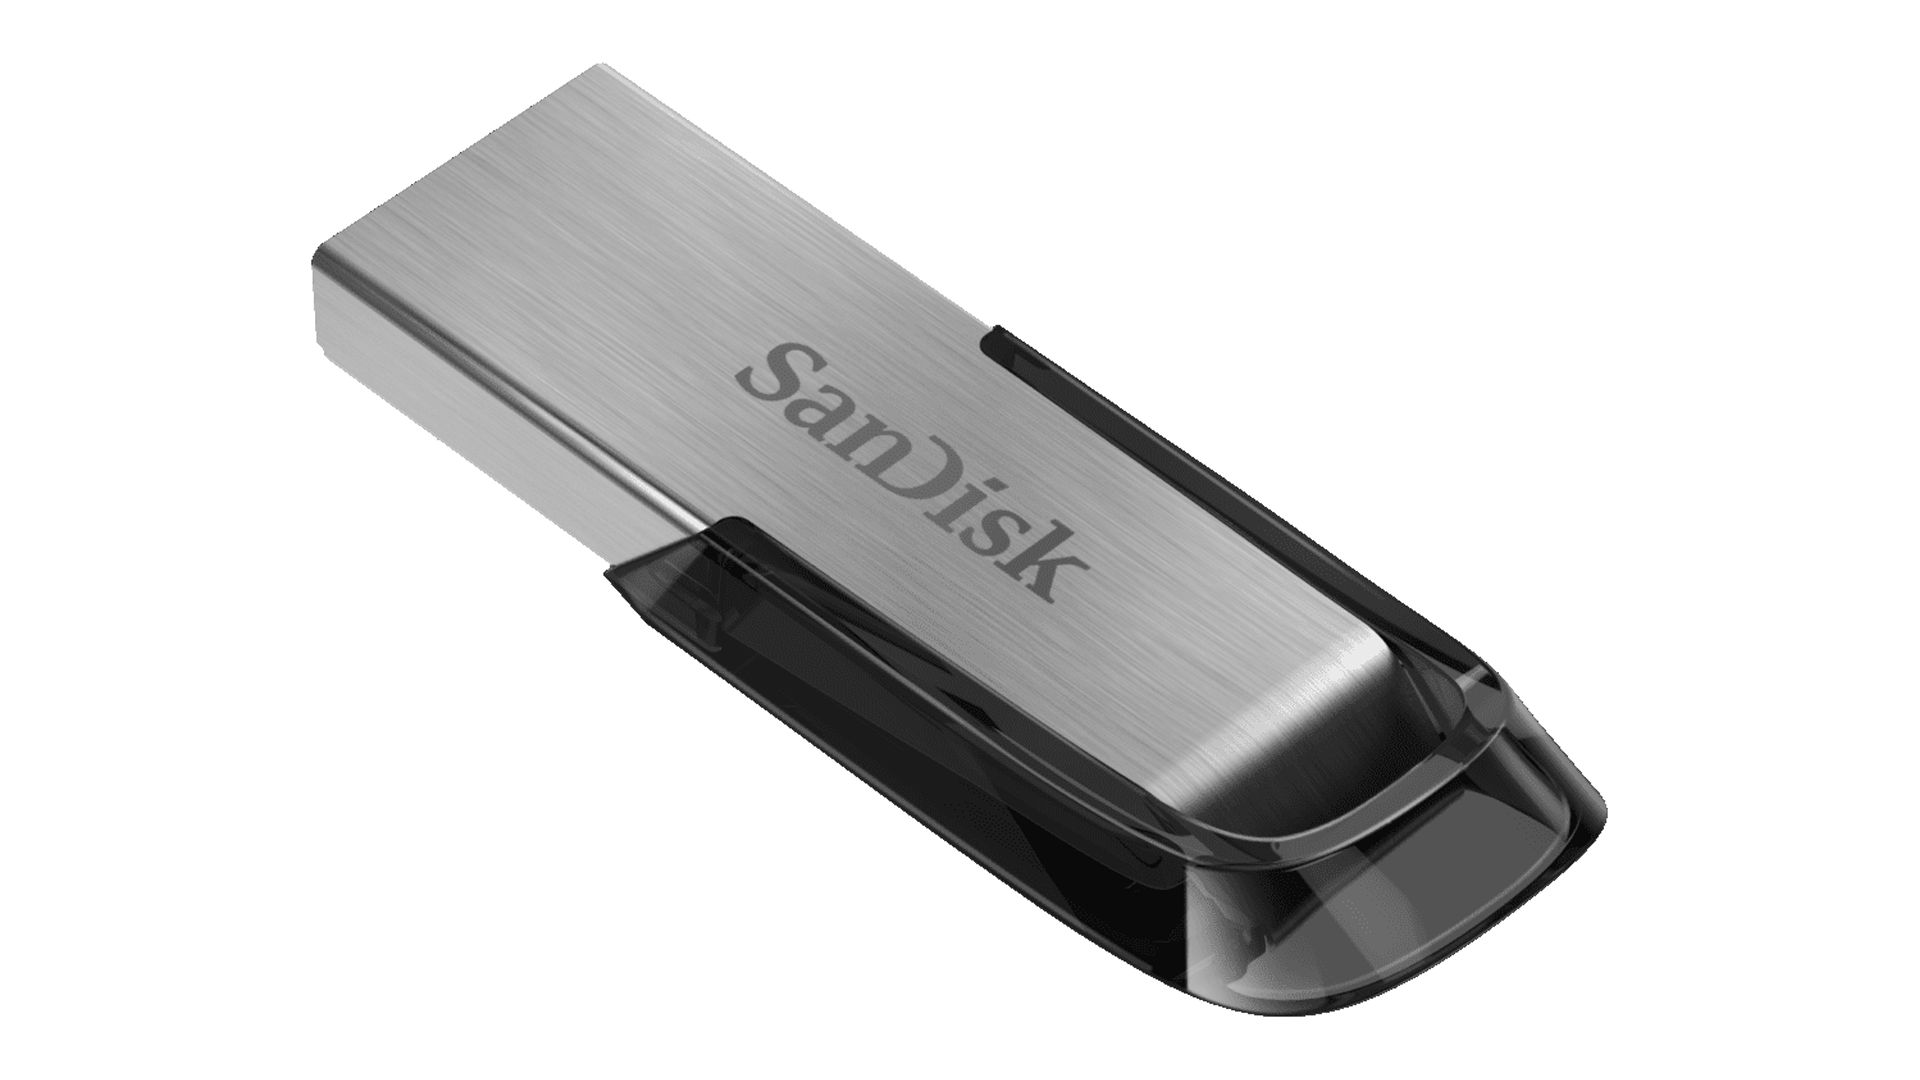 SanDisk 32GB Ultra Flair™ USB 3.0 Flash Drive - SDCZ73-032G-A46 - image 3 of 4